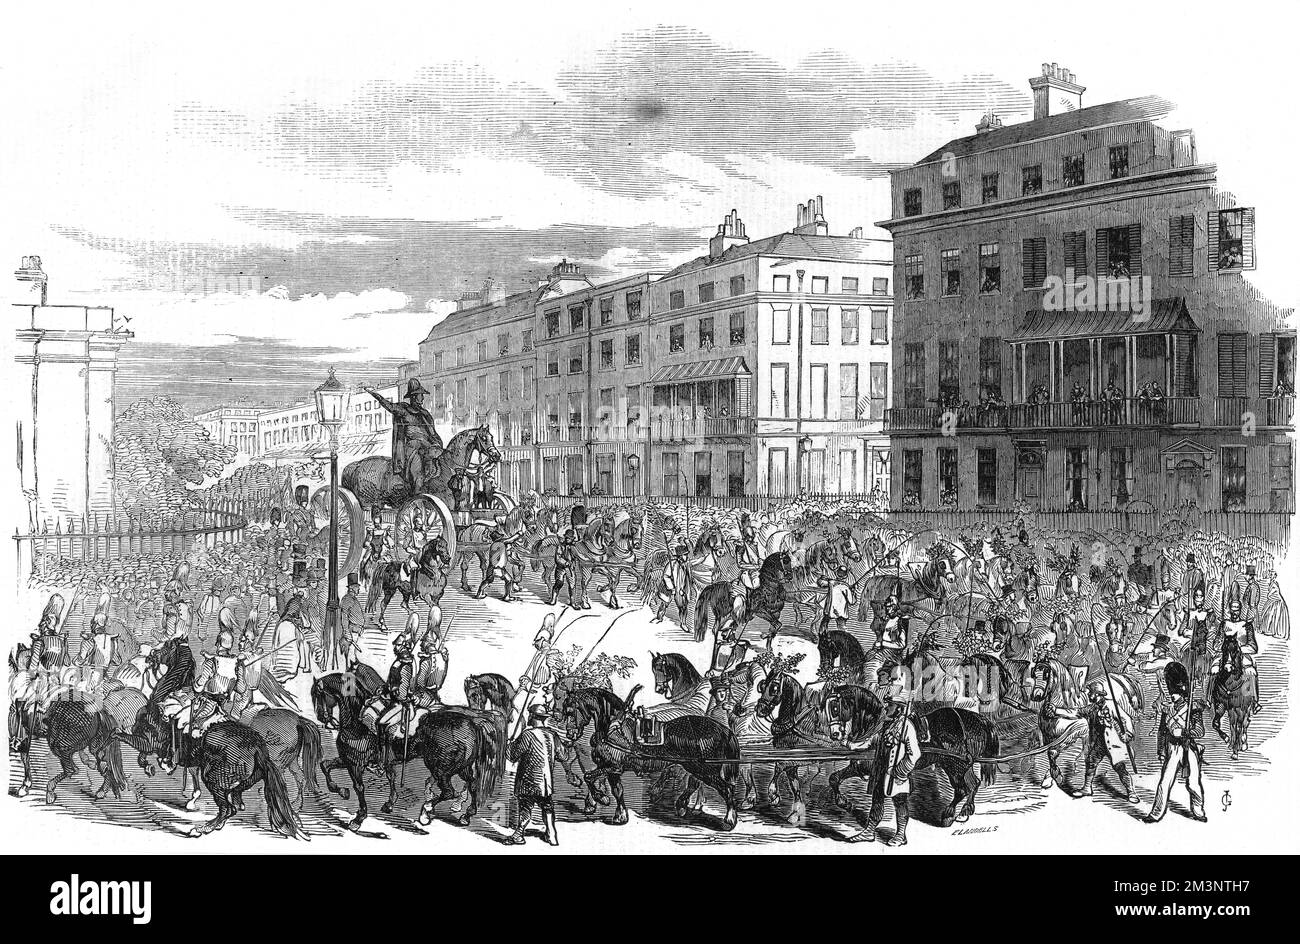 The grand procession of the great equestrian statue of the Duke of Wellington astride his horse Copenhagen, as the bronze statue by Matthew Cotes Wyatt which was the largest in Britain when it was unveiled in 1846, is pulled by a team of horses to Hyde Park Corner for installation atop the Wellington or Constitution Arch. Here the procession makes its way down Park Lane.  1846 Stock Photo